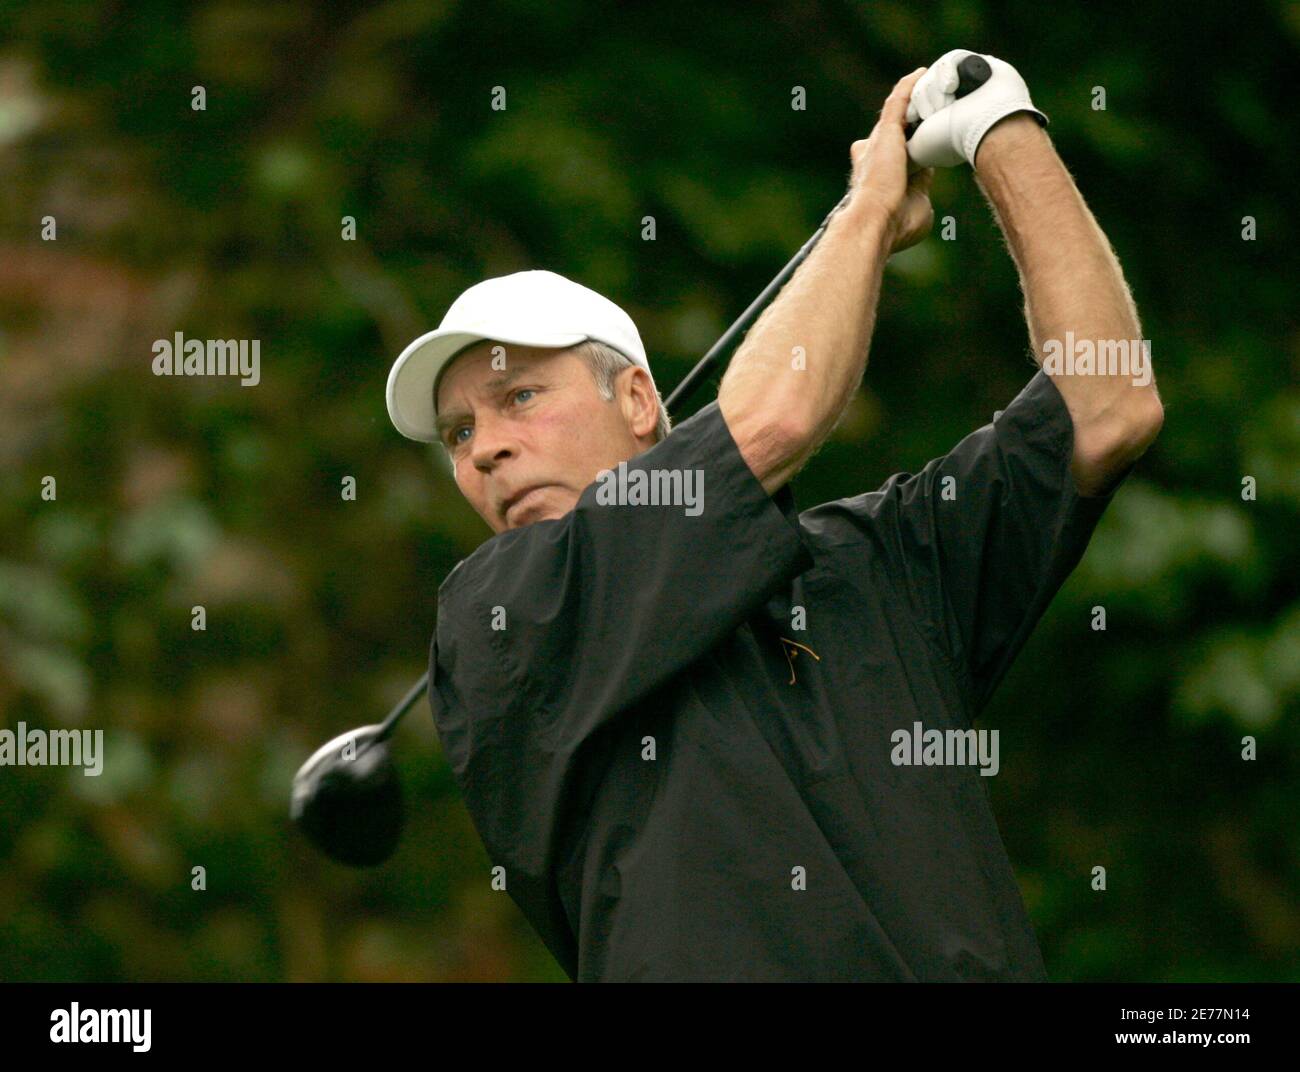 Ben Crenshaw of the U.S. tees off on the second hole during third round play in the 2006 Masters golf tournament at the Augusta National Golf Club in Augusta, Georgia, April 8, 2006. Crenshaw scored a double-bogey seven on the hole.     REUTERS/Mike Blake Stock Photo